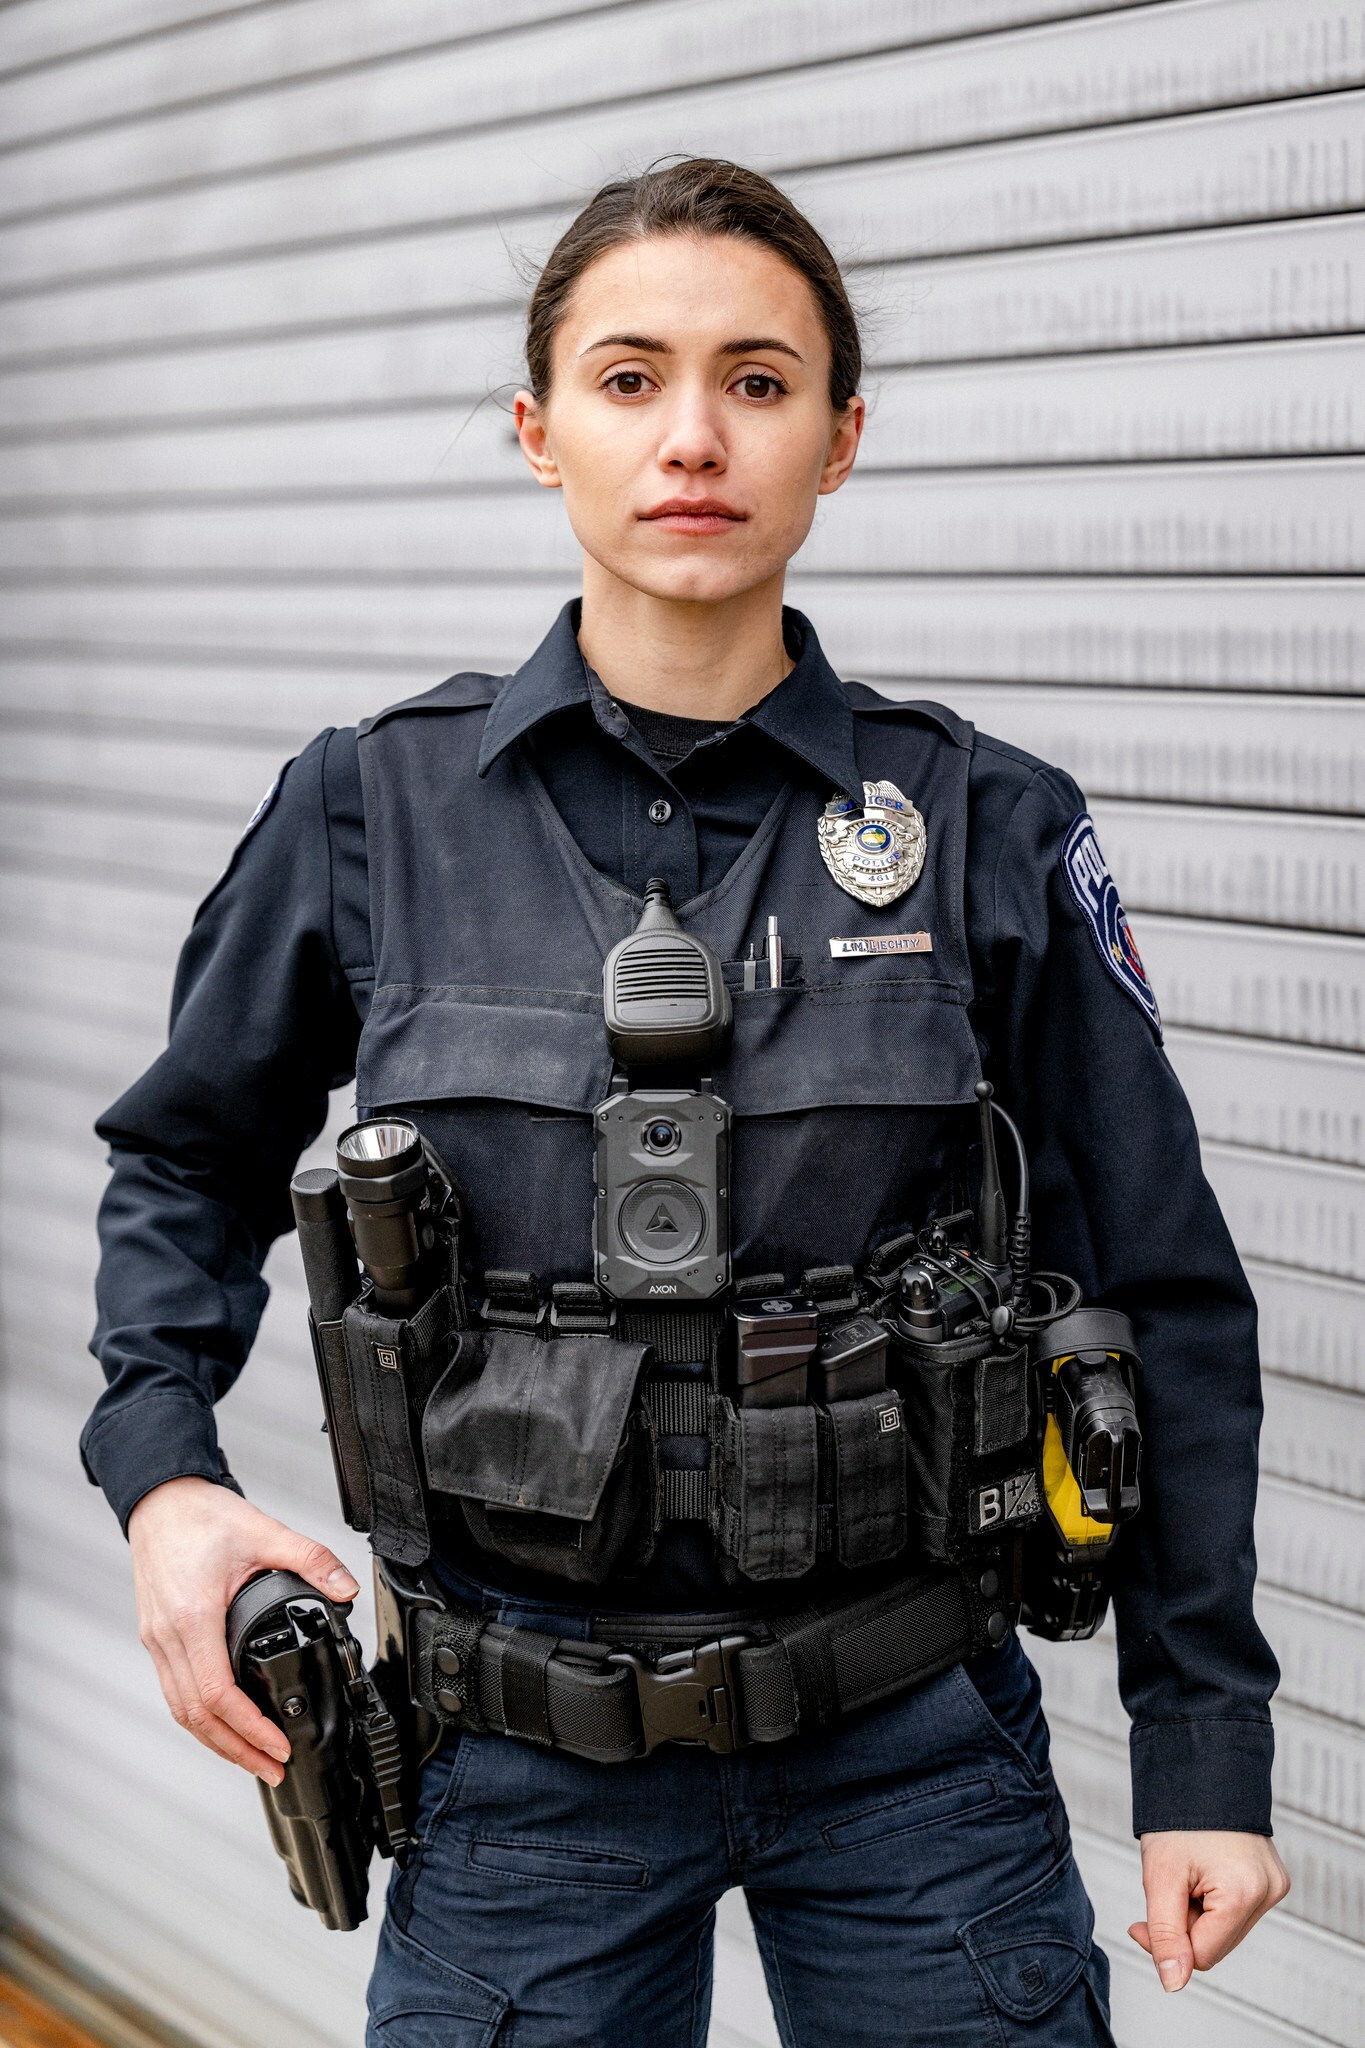 Axon launches next generation body camera with more features to never ...